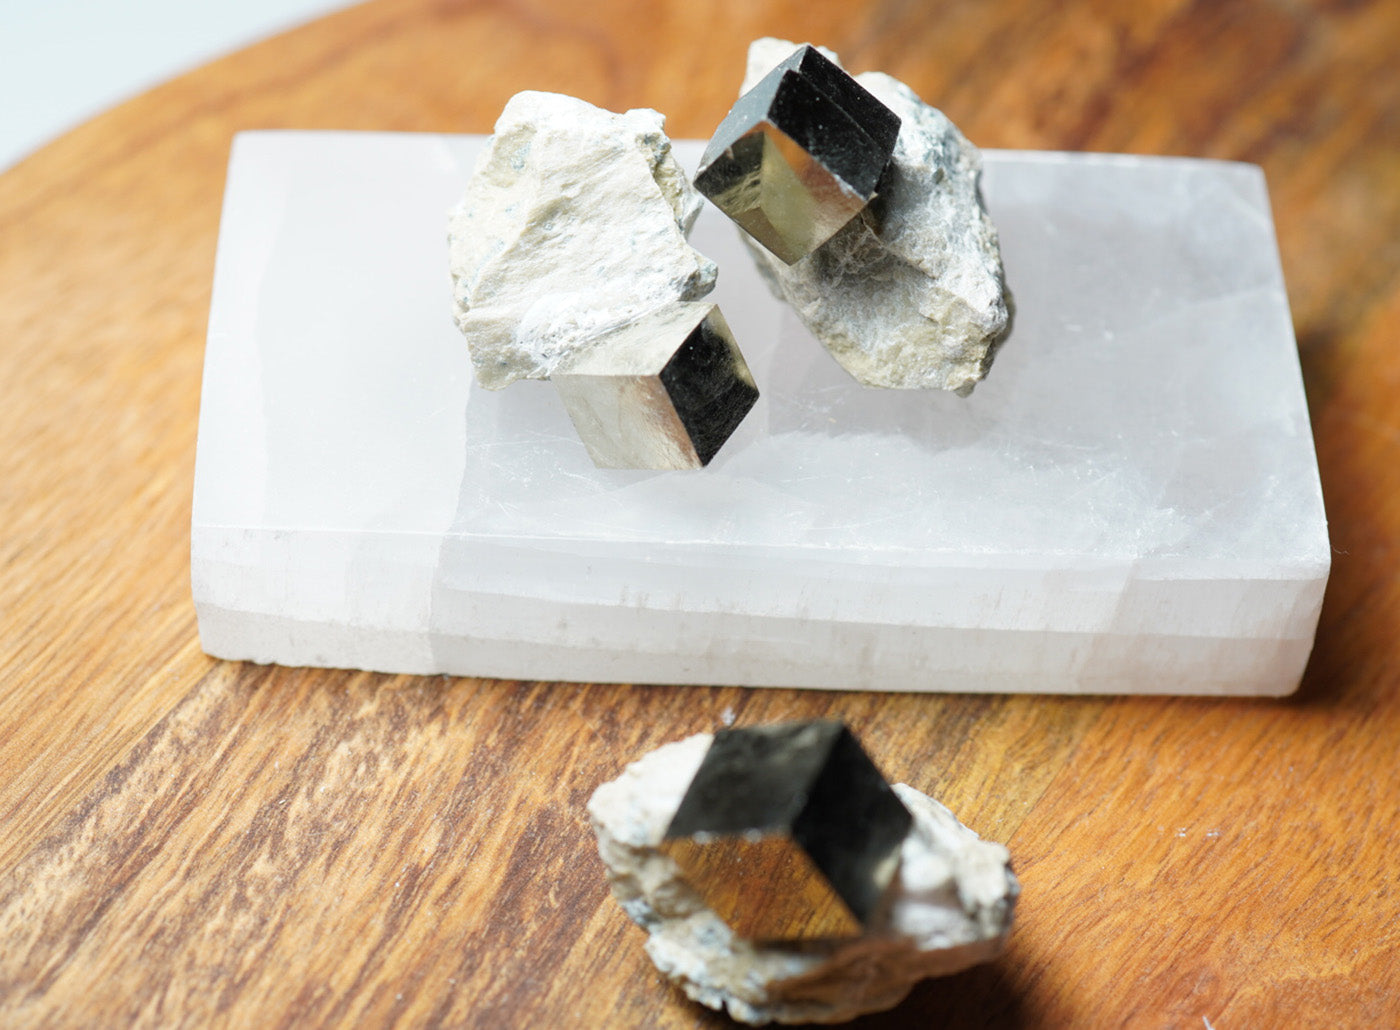 Pyrite Cube in Matrix - crystalsbysabeads.com